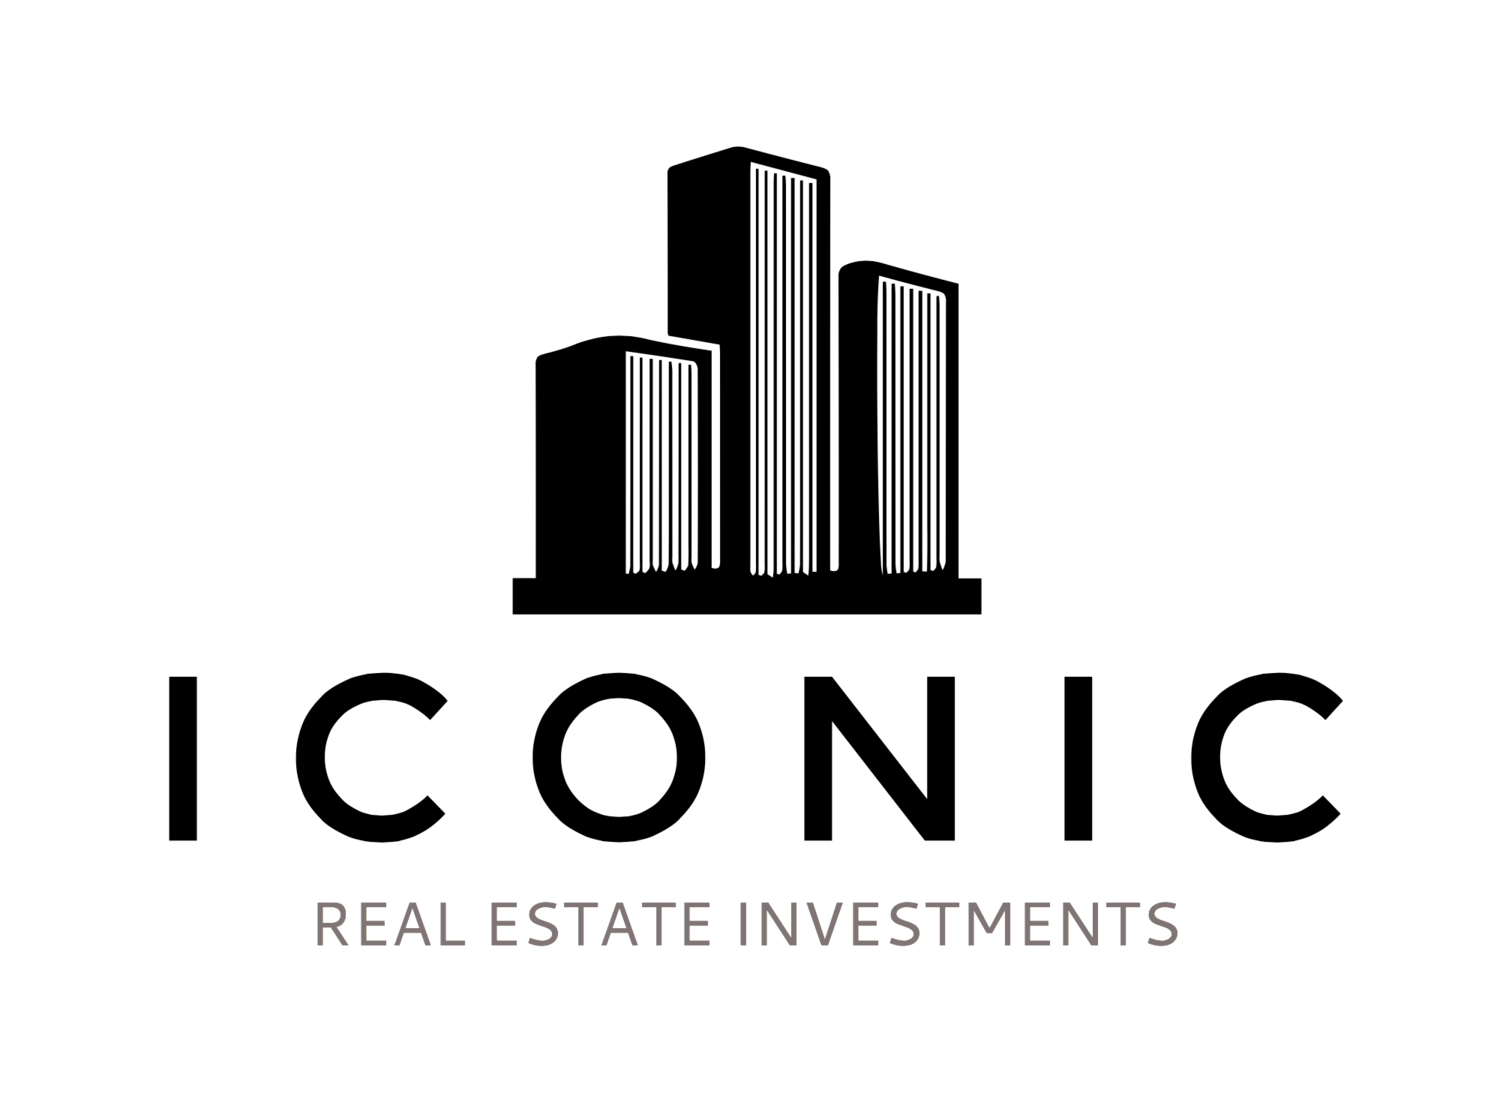 Iconic Real Estate Investments